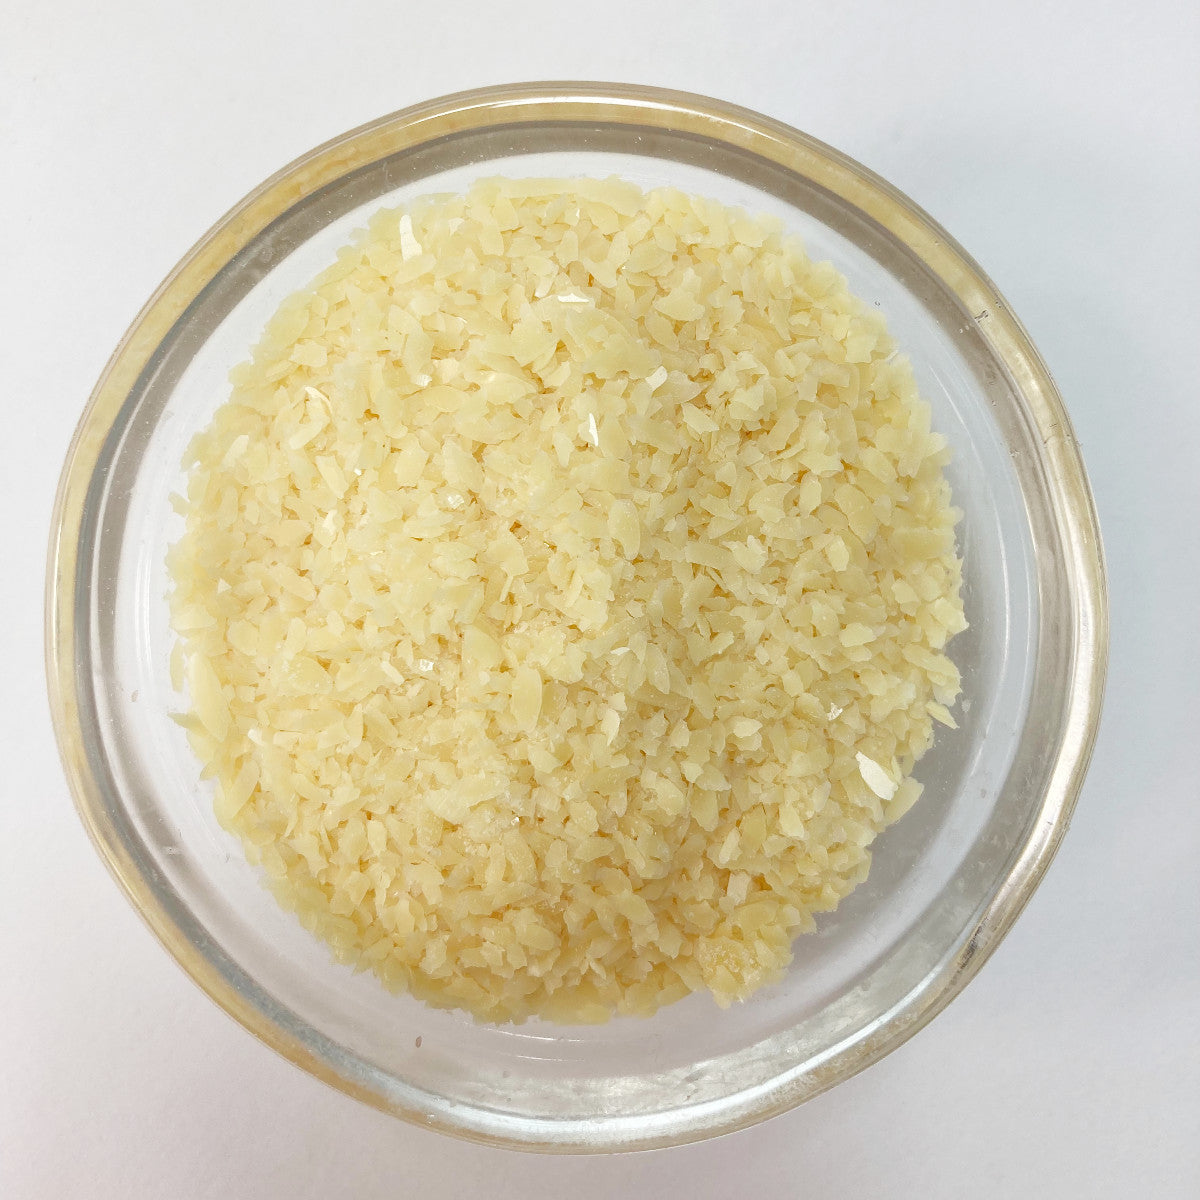 Candelilla Wax – Oregon Trail Soapers Supply